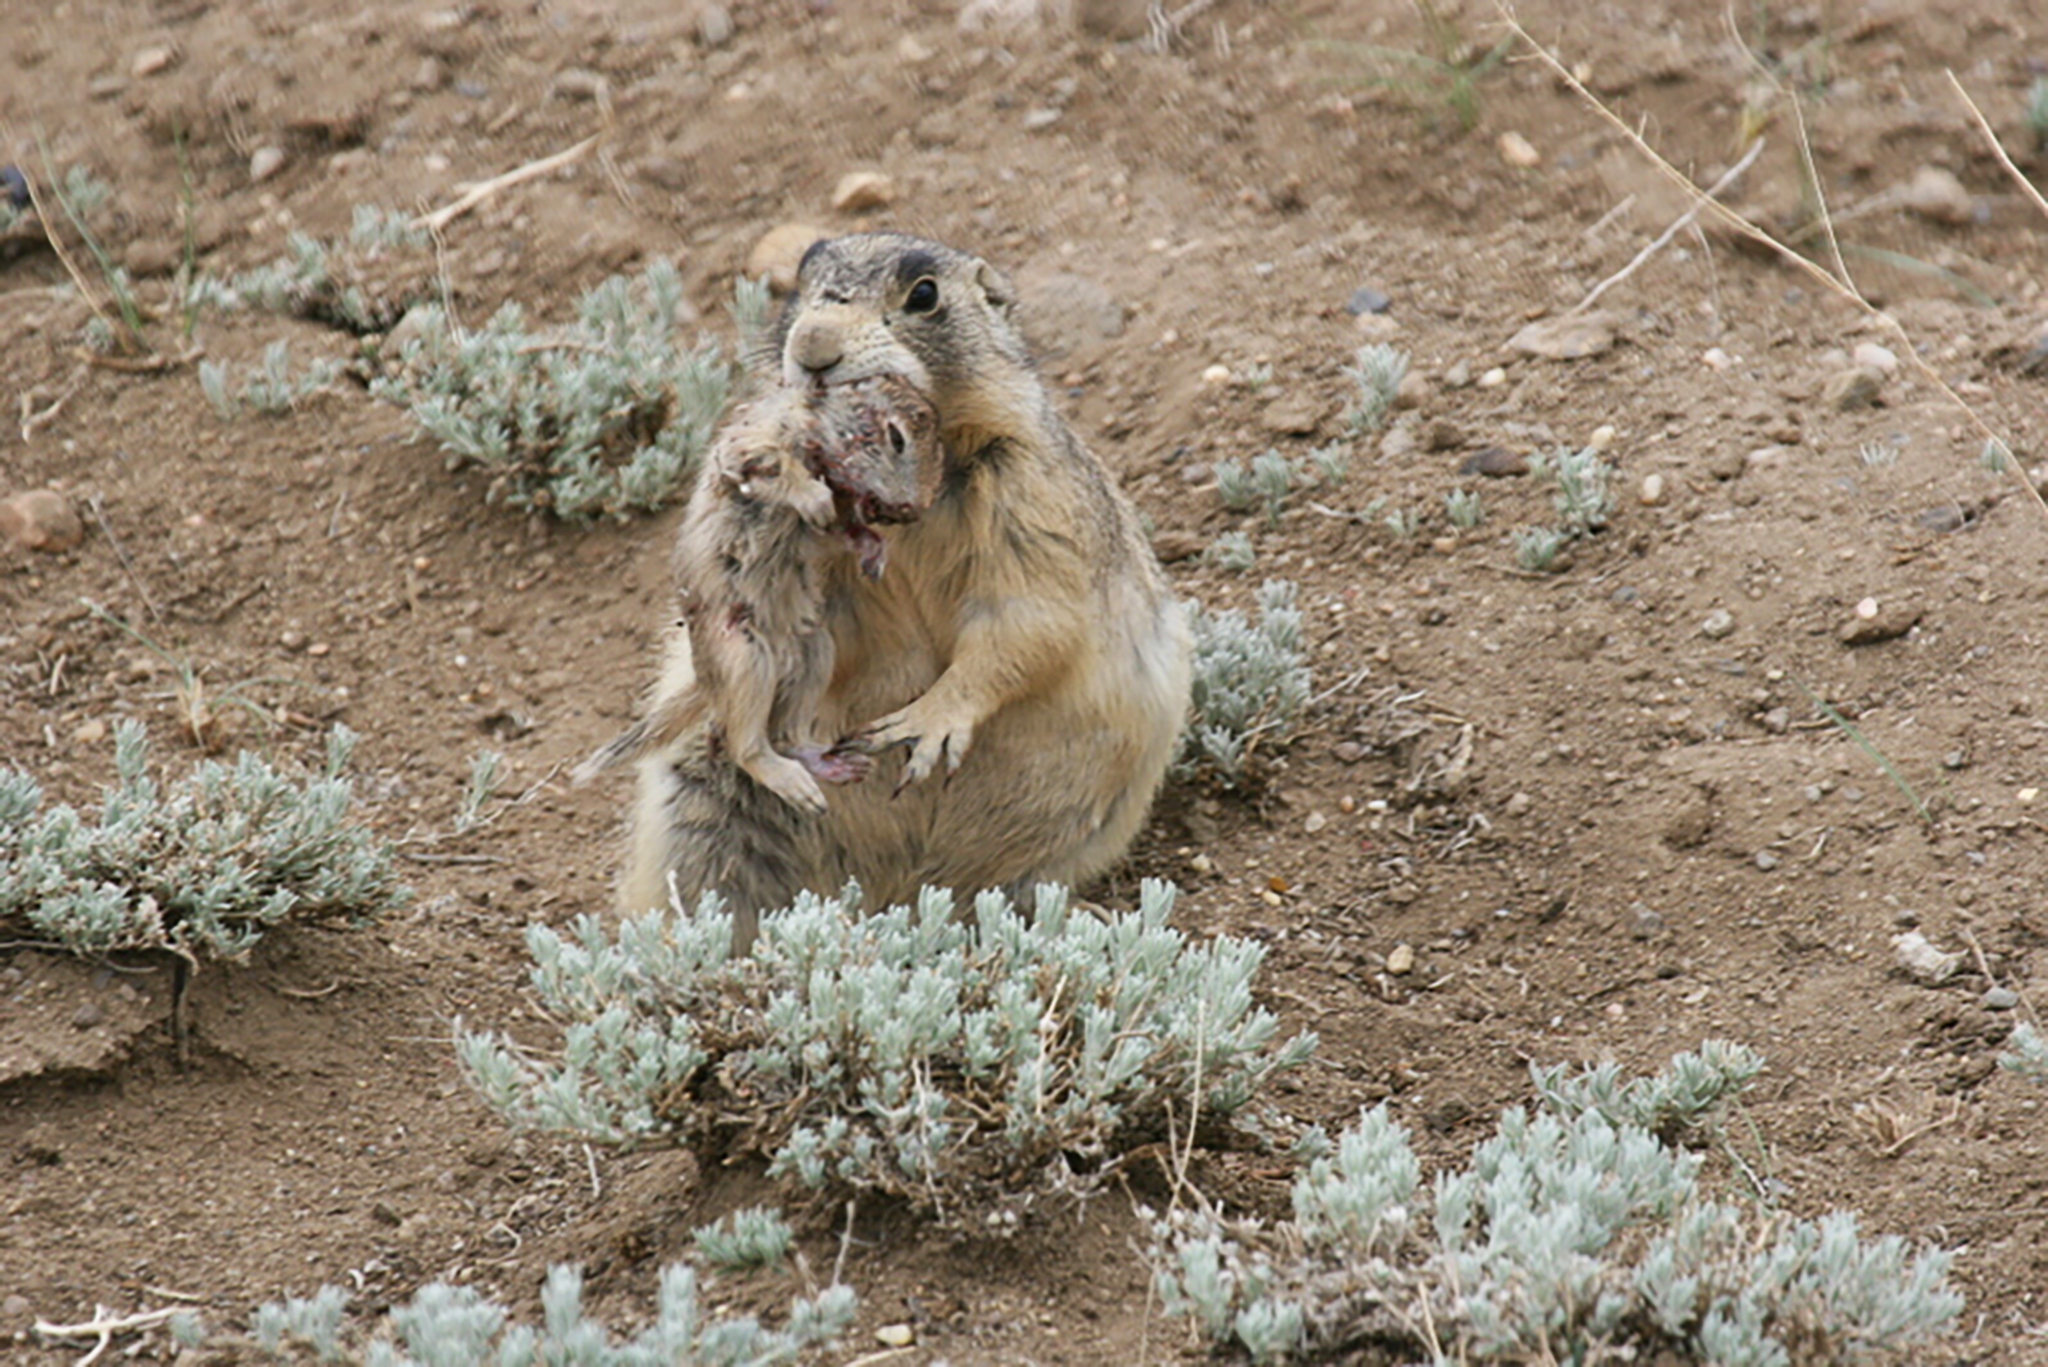 Prairie Dogs Are Serial Killers That Murder Their Competition